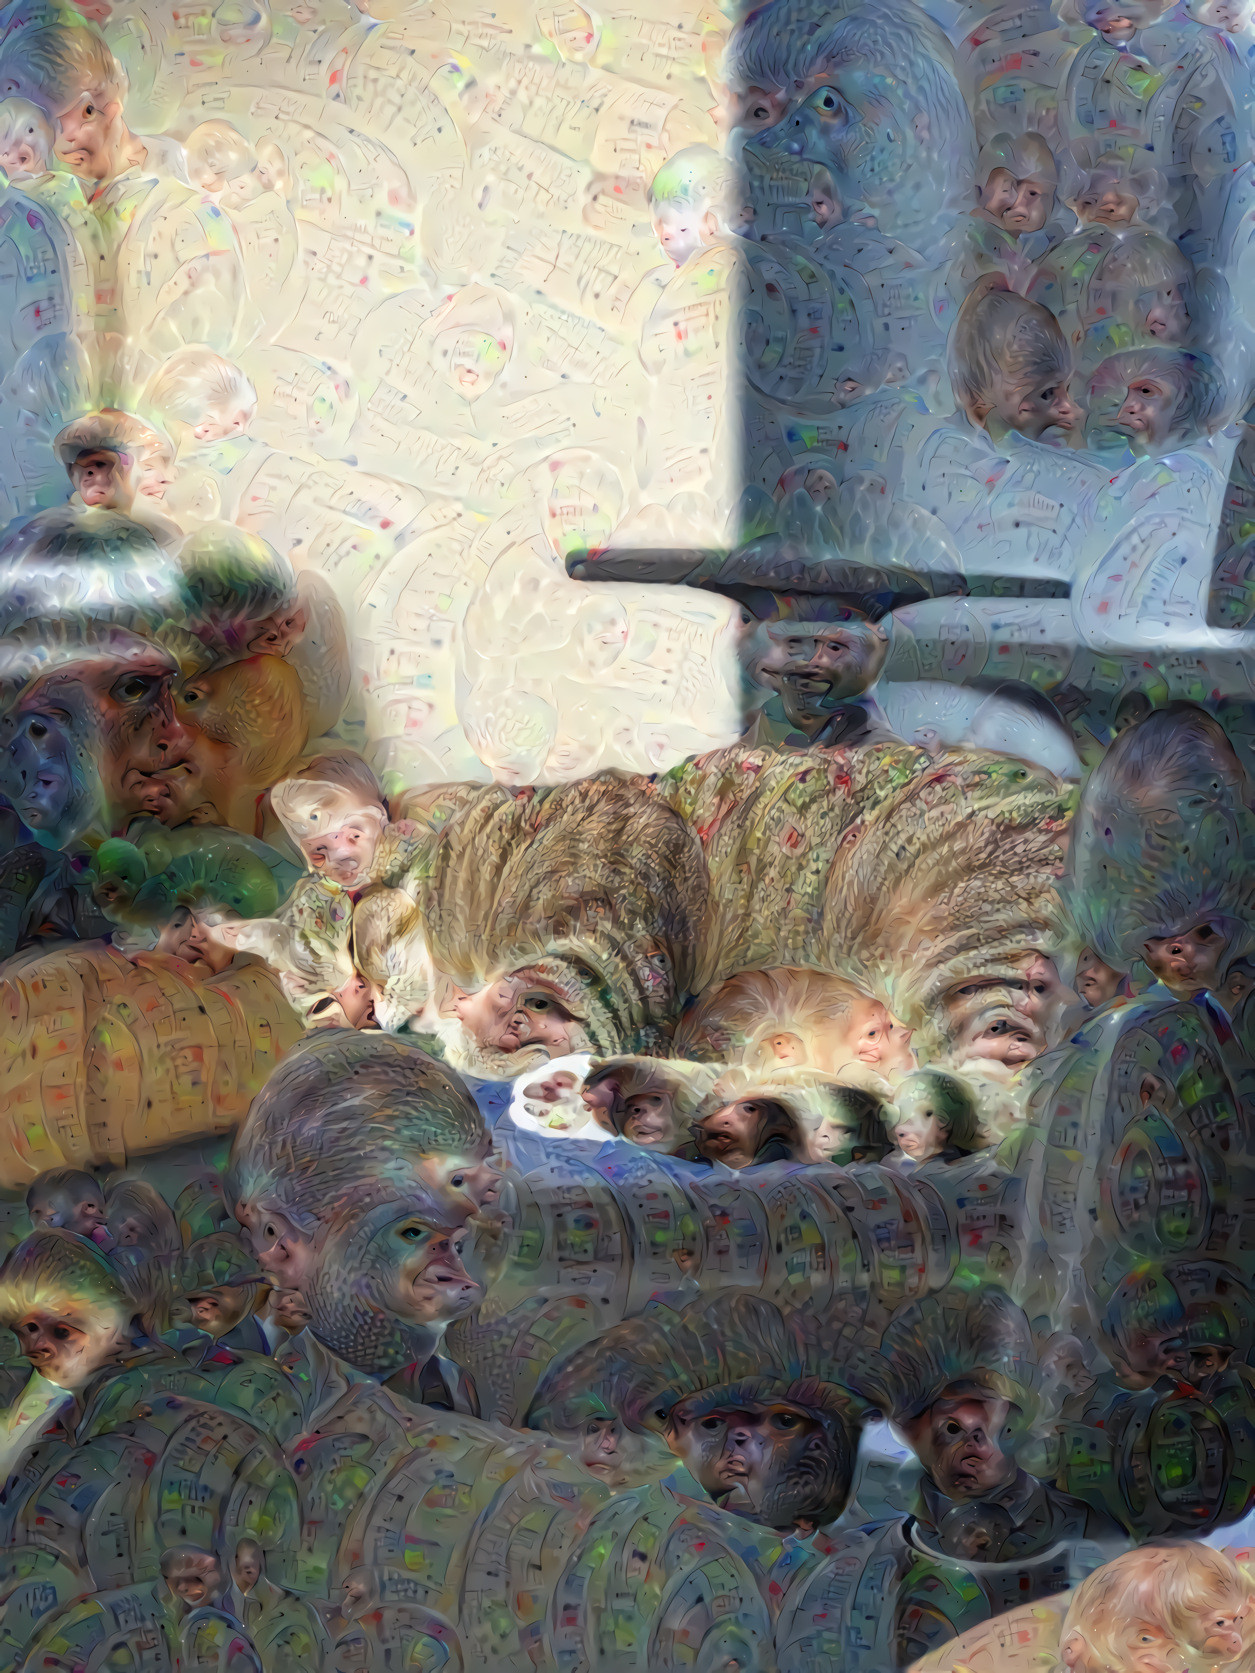 When deep dream goes wrong lol